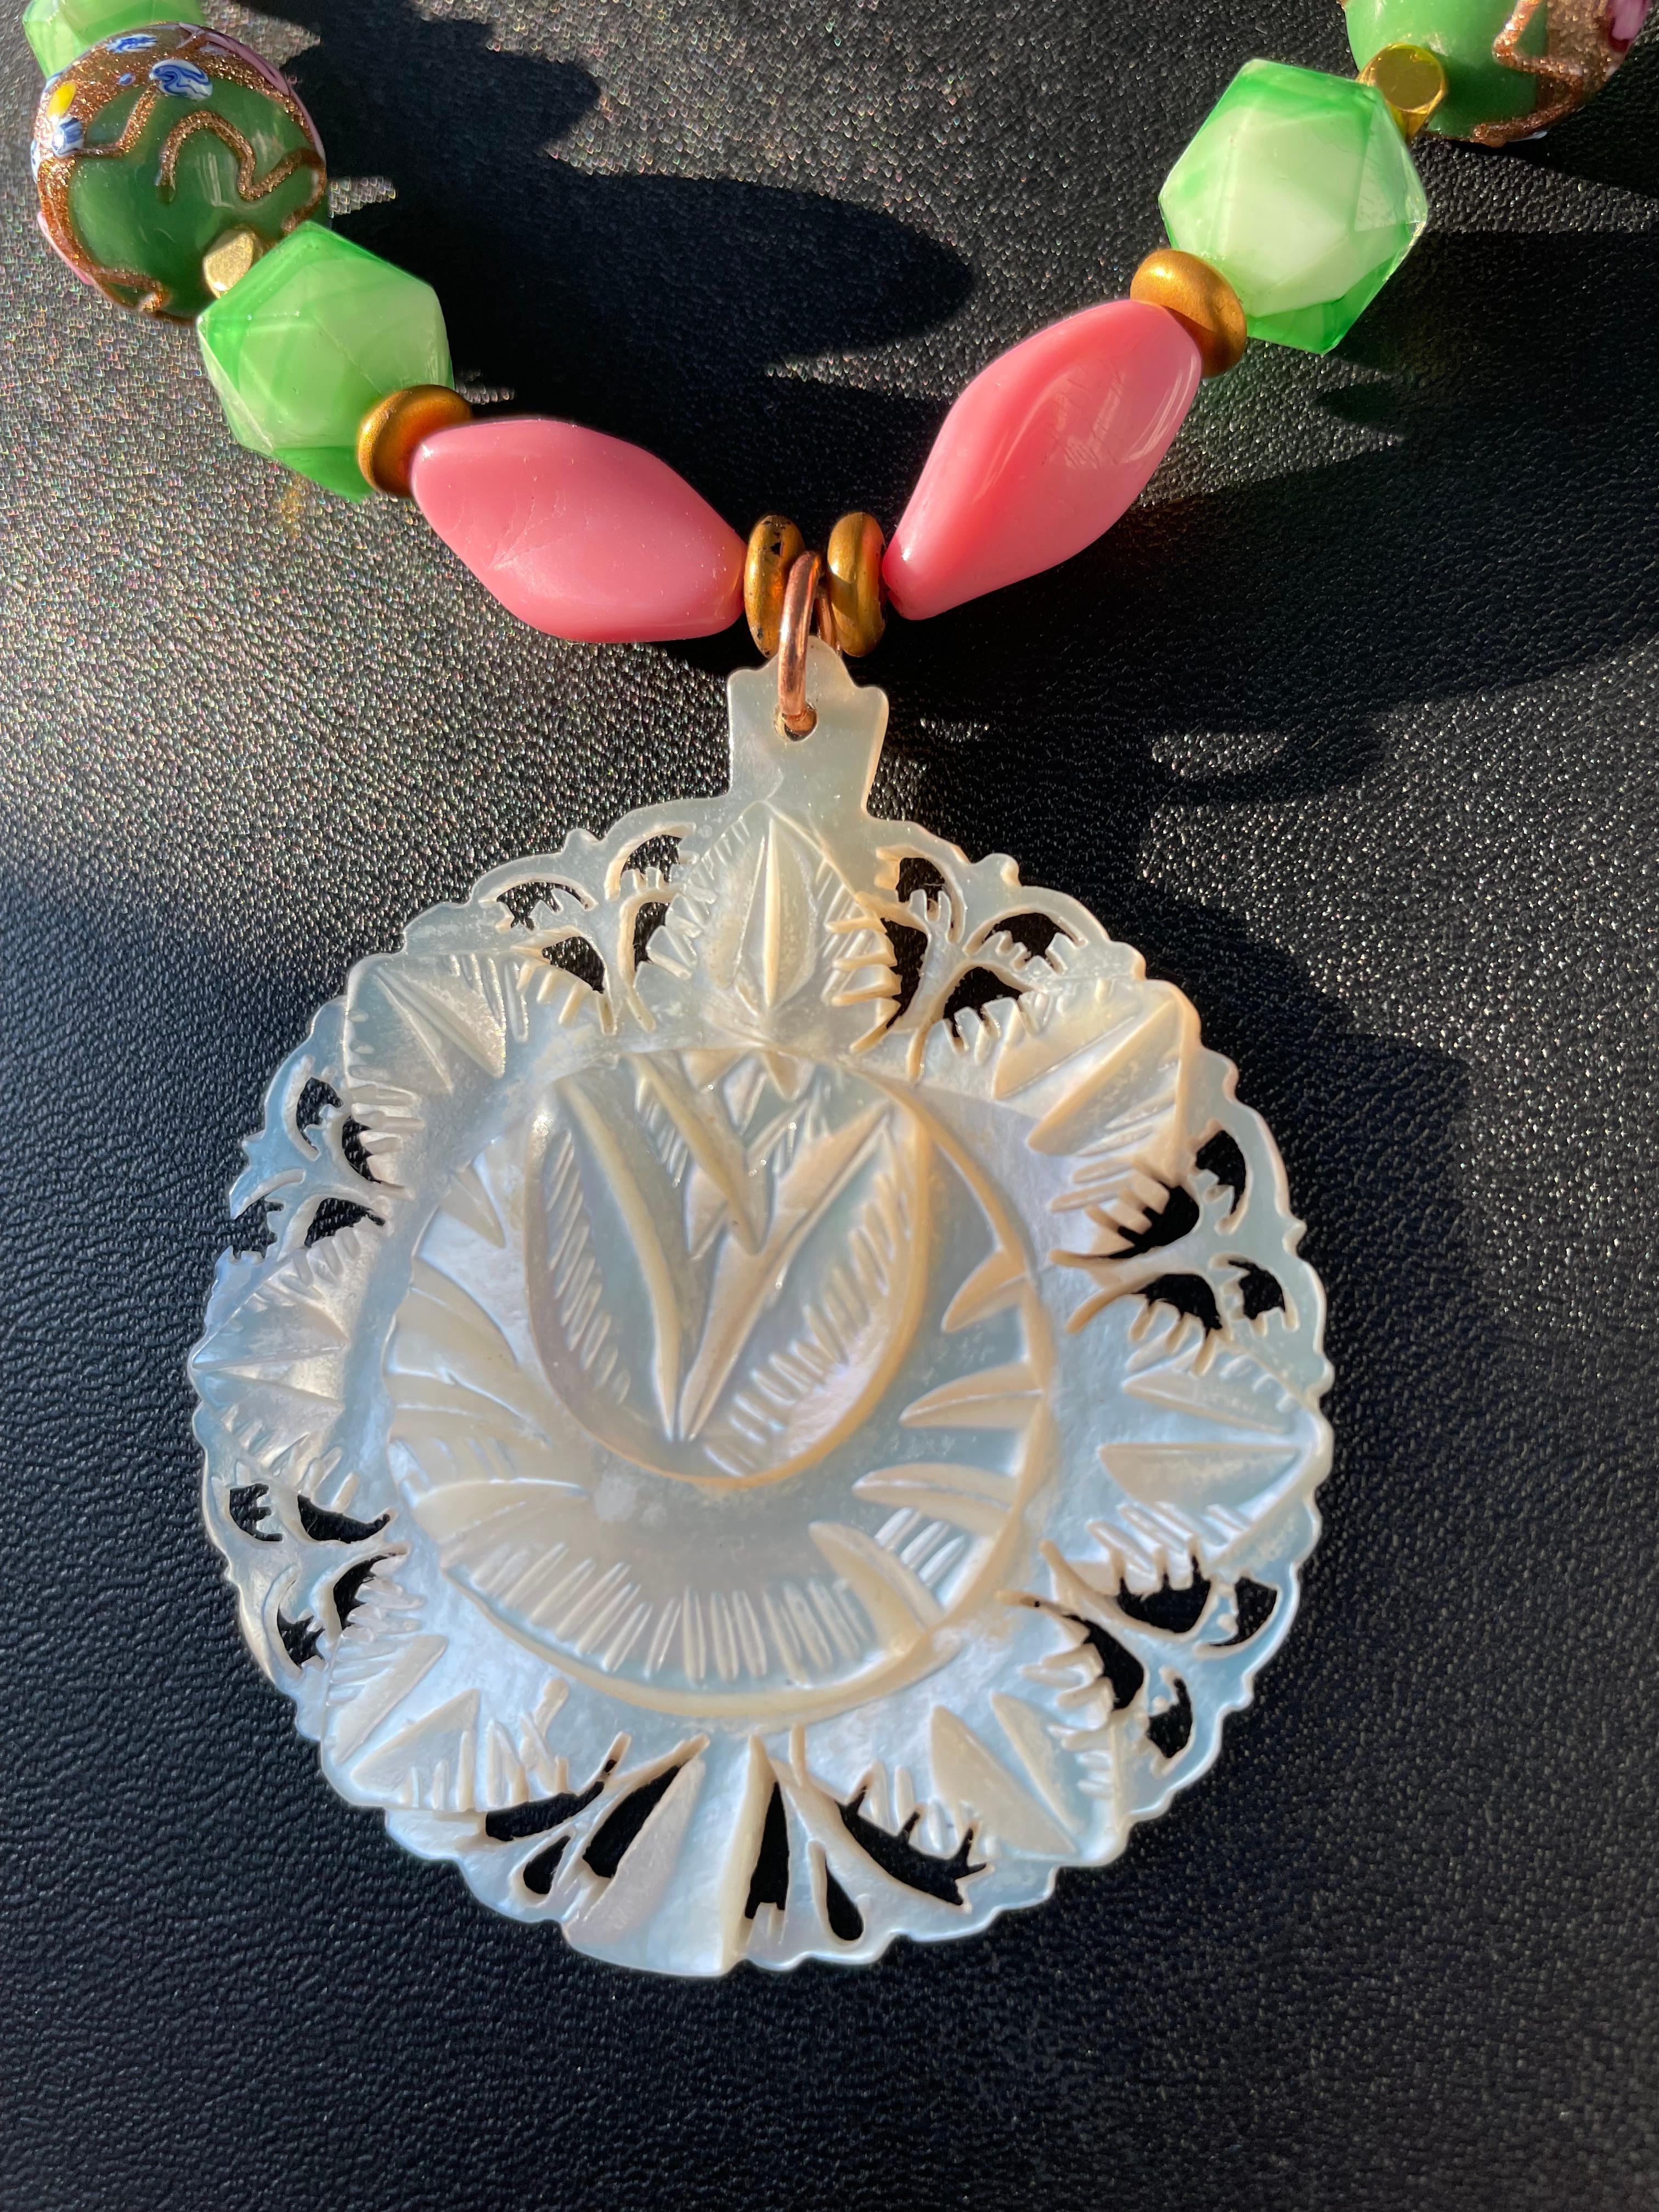 Lorraine’s Bijoux offers a vintage hand carved Indian medallion pendant necklace.
A string of all vintage Czech and Venetian glass beads add lovely pink and green colors to enhance the pendant. 
This is an extraordinarily lovely, feminine accessory